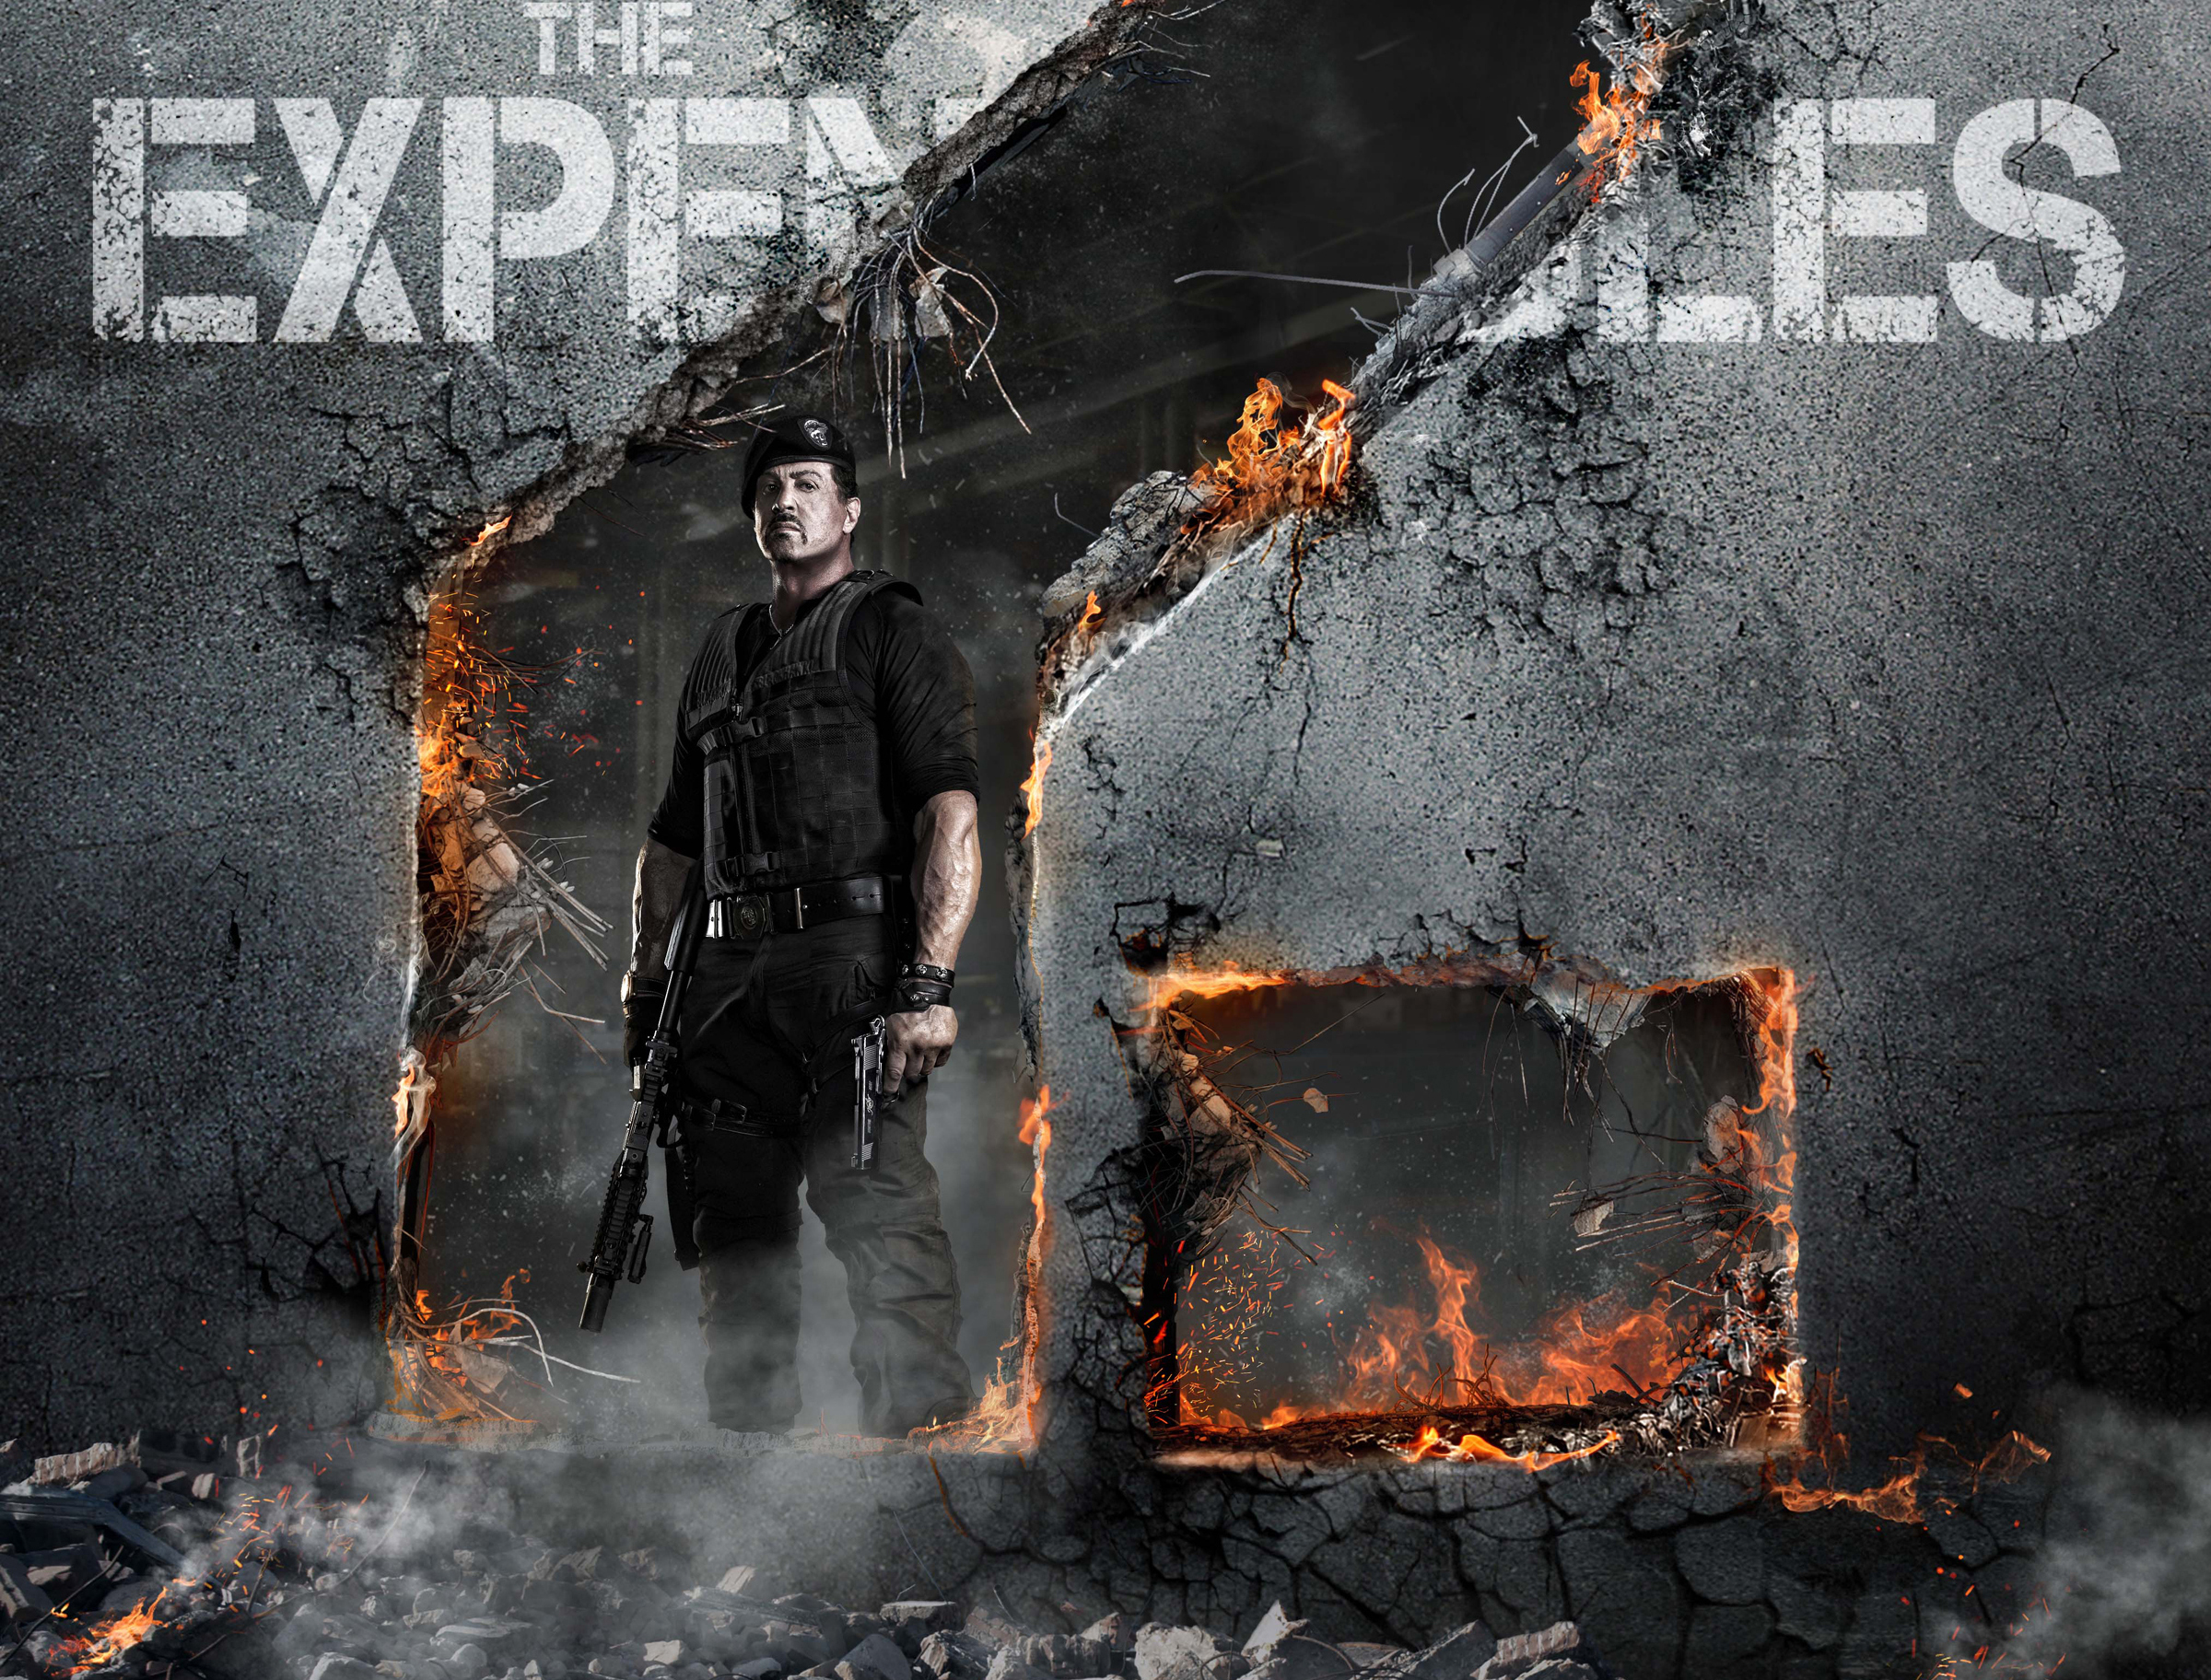 HD wallpaper movie, the expendables 2, barney ross, sylvester stallone, the expendables